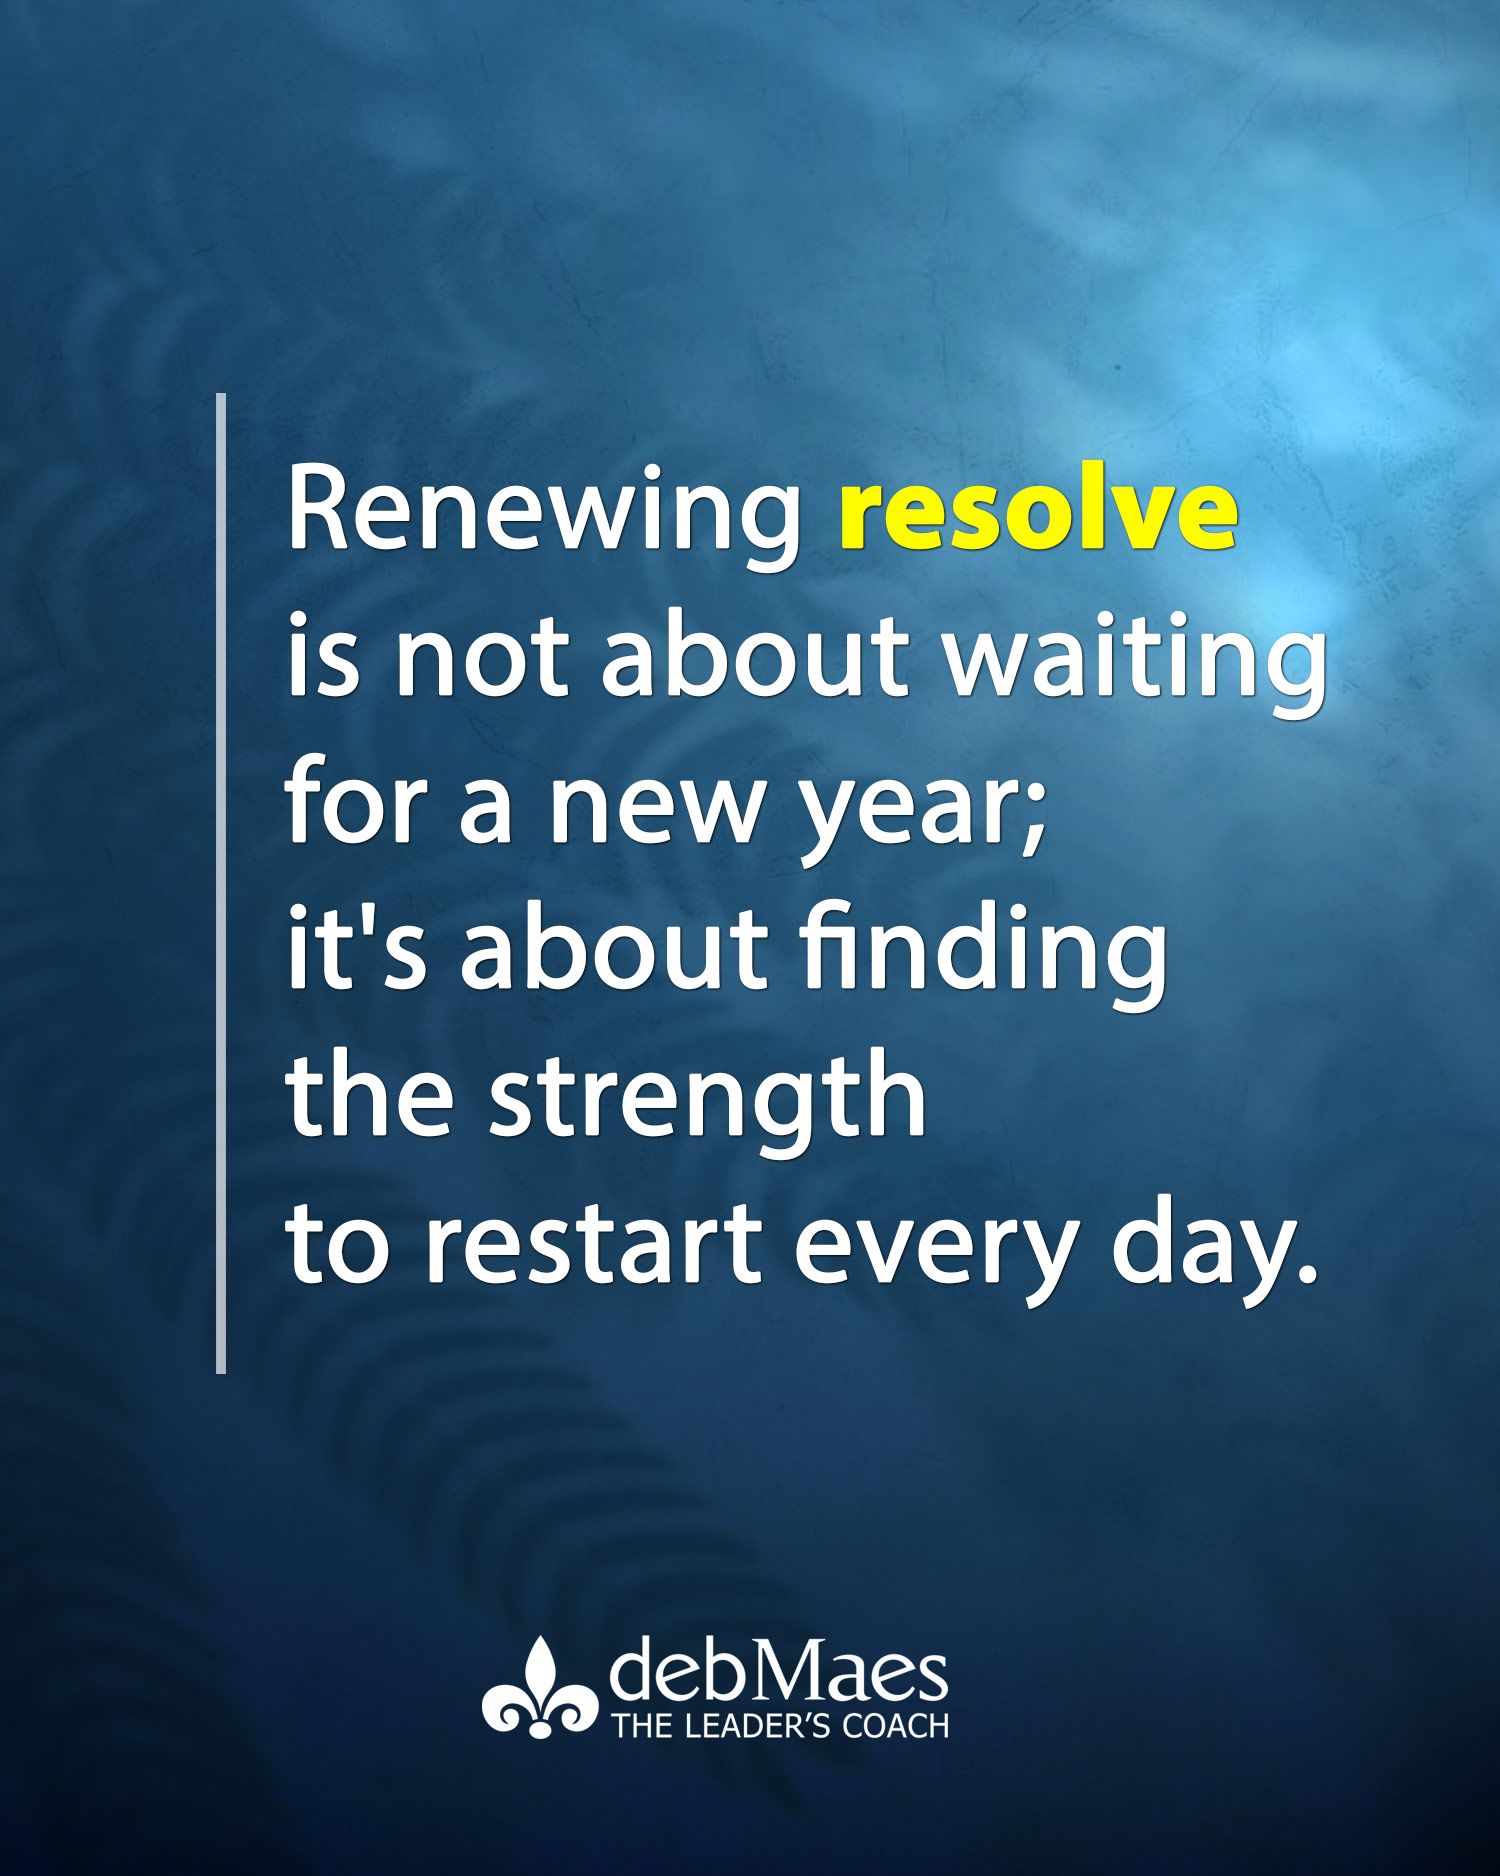 Renewing resolve is not about waiting for a new year; it's about finding the strength to restart every day